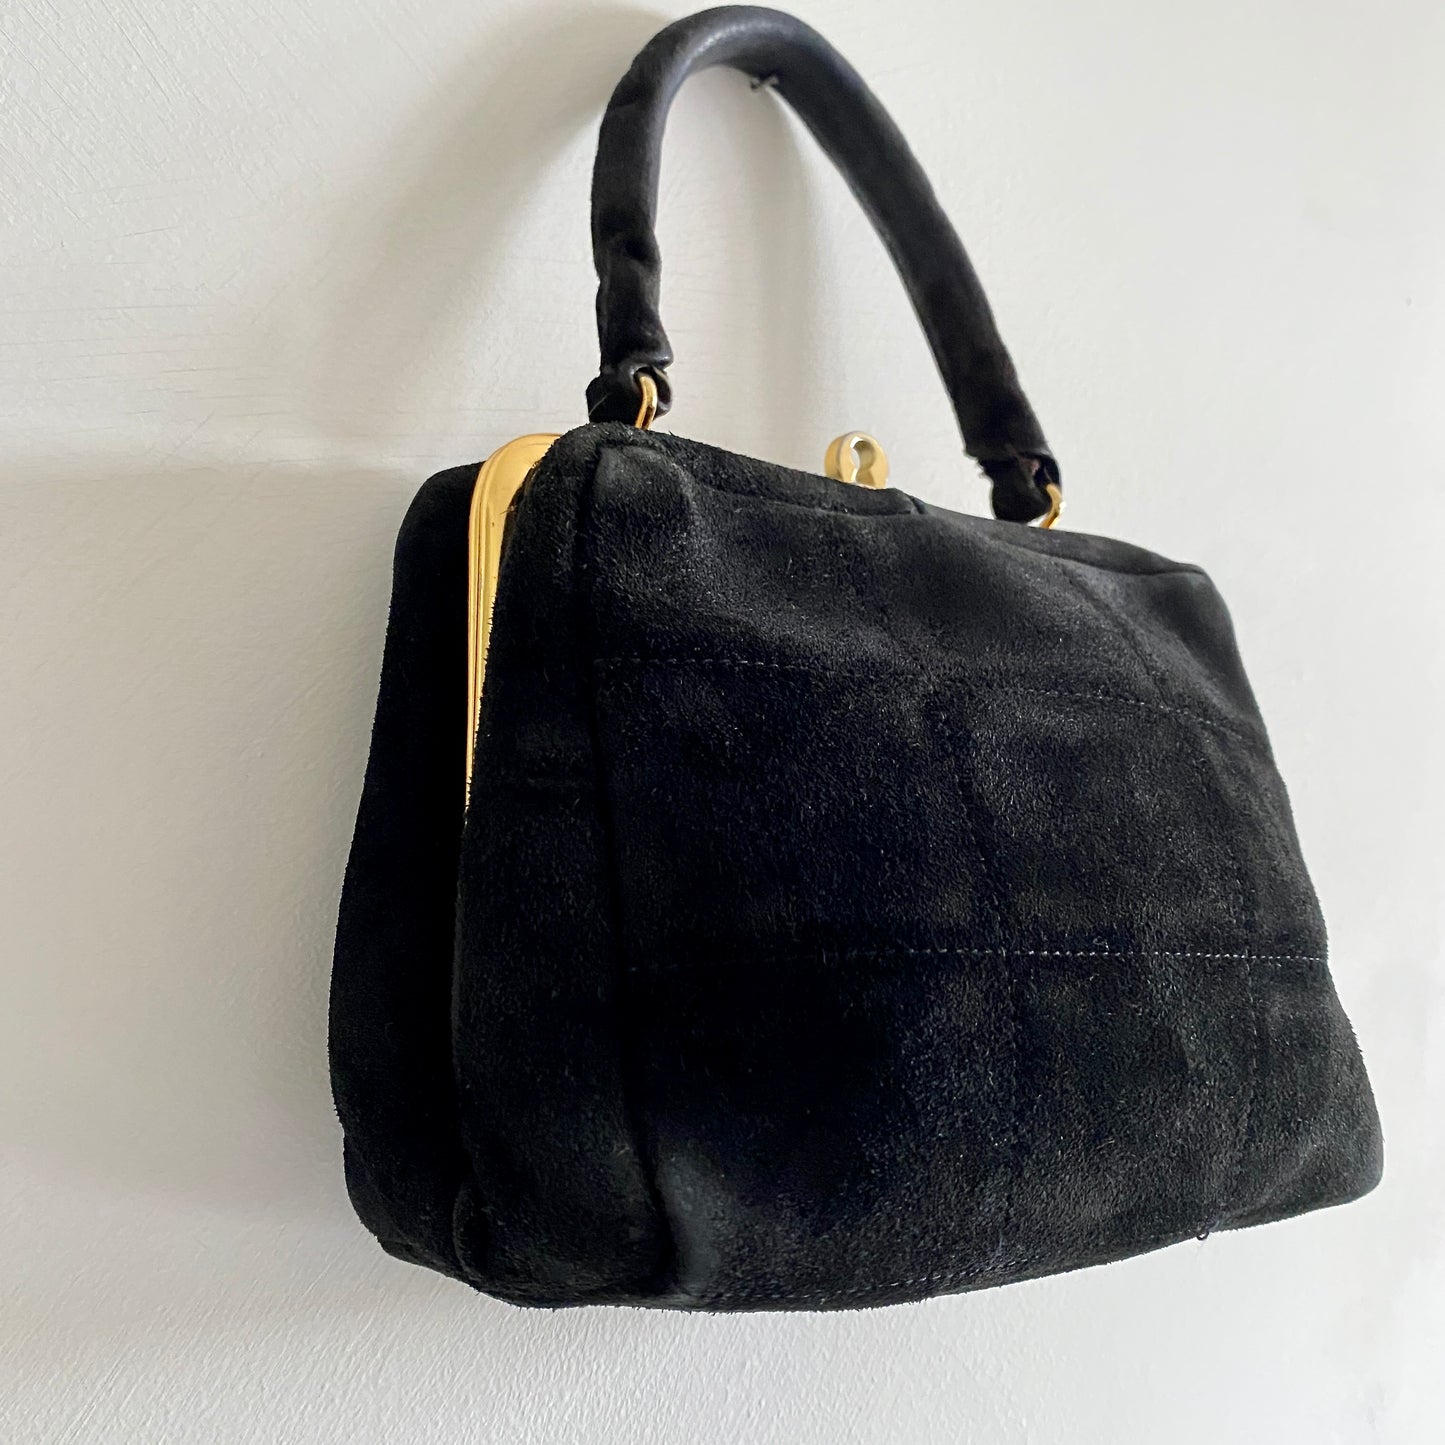 60s vintage black suede box bag By Brandahl Production Stitched square detail to front Clasp fastening to top Handle measures 10.5" Gold hardware Fully lined with inside pocket  Measures 7.5" wide x 6" high x 3" deep